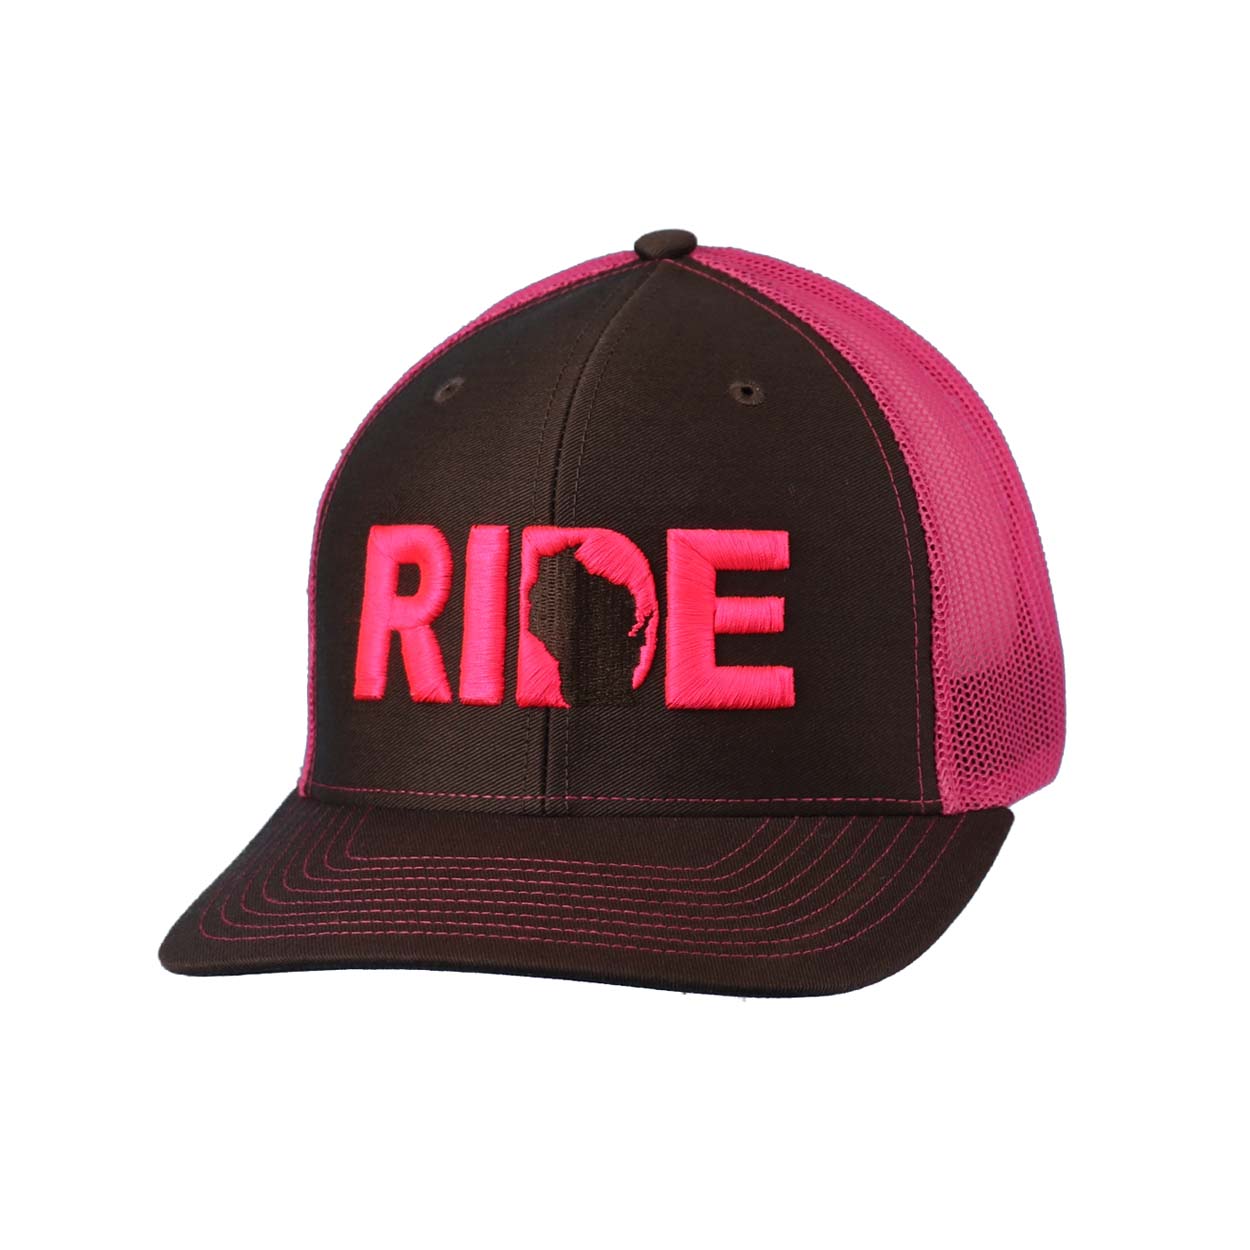 Ride Wisconsin Classic Embroidered Snapback Trucker Hat Gray/Pink